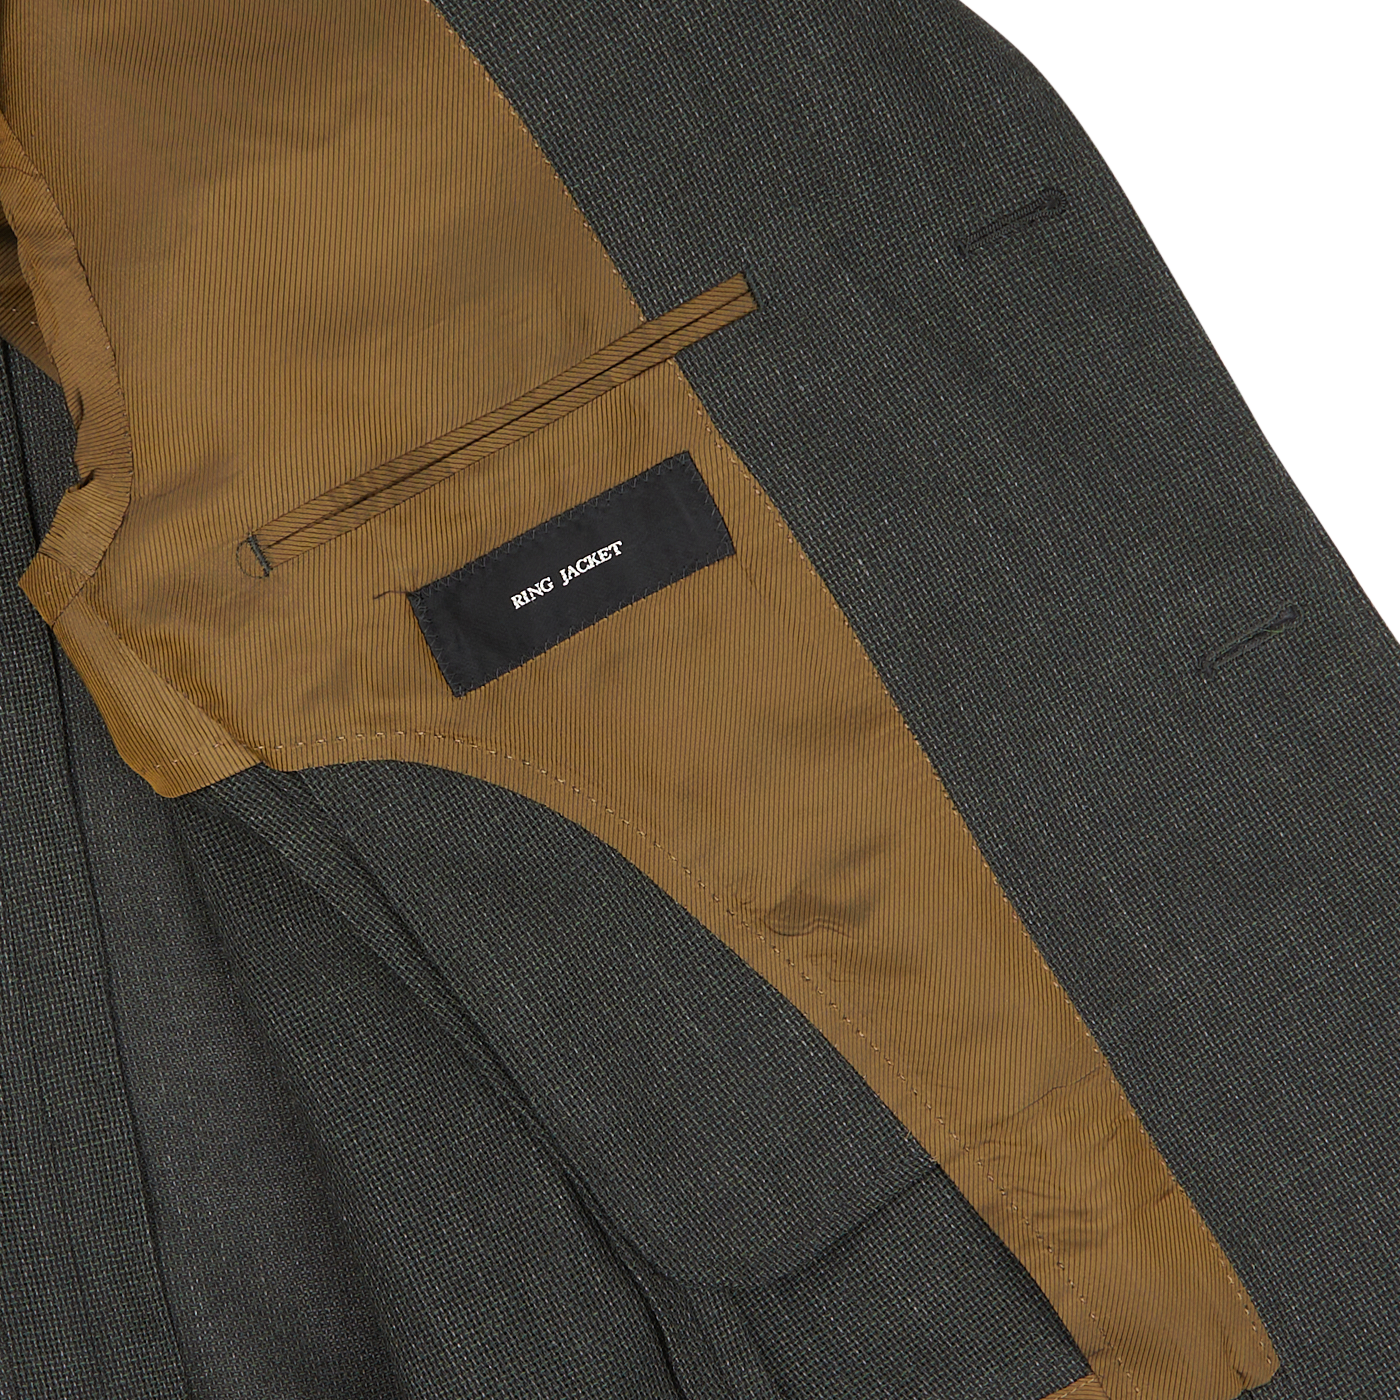 Close-up of an open Ring Jacket Dark Green Wool Balloon Travel Blazer revealing a tan inner lining and a black label reading "Best Jacket.